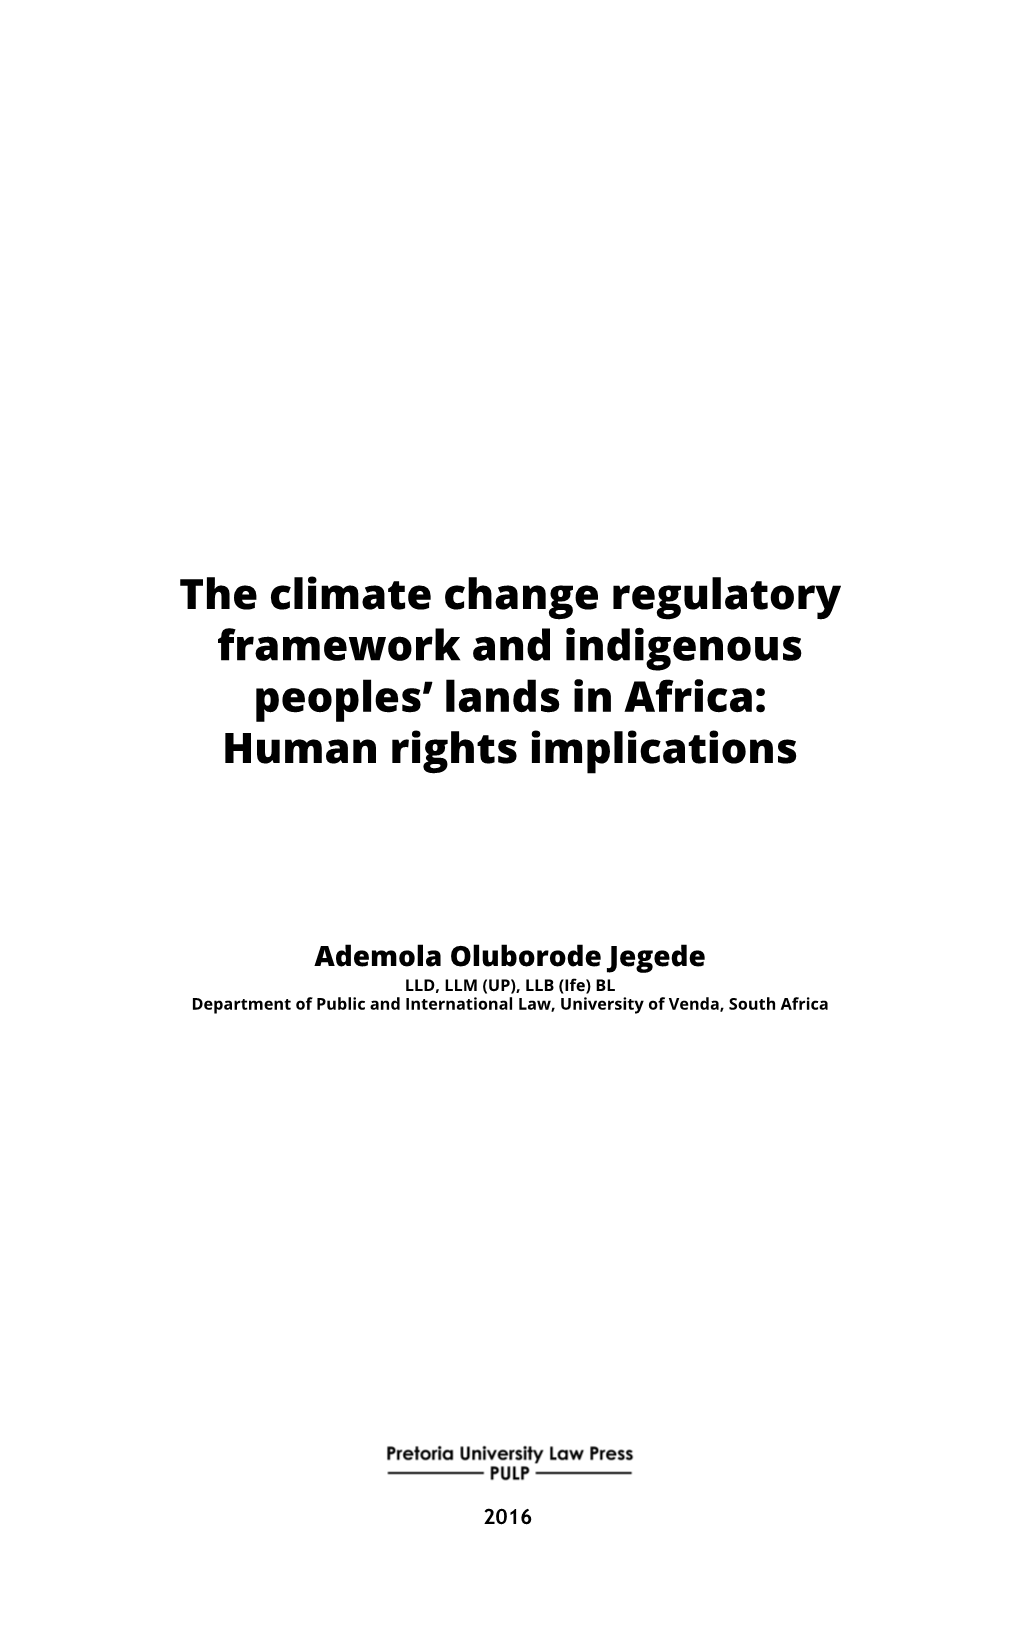 The Climate Change Regulatory Framework and Indigenous Peoples’ Lands in Africa: Human Rights Implications